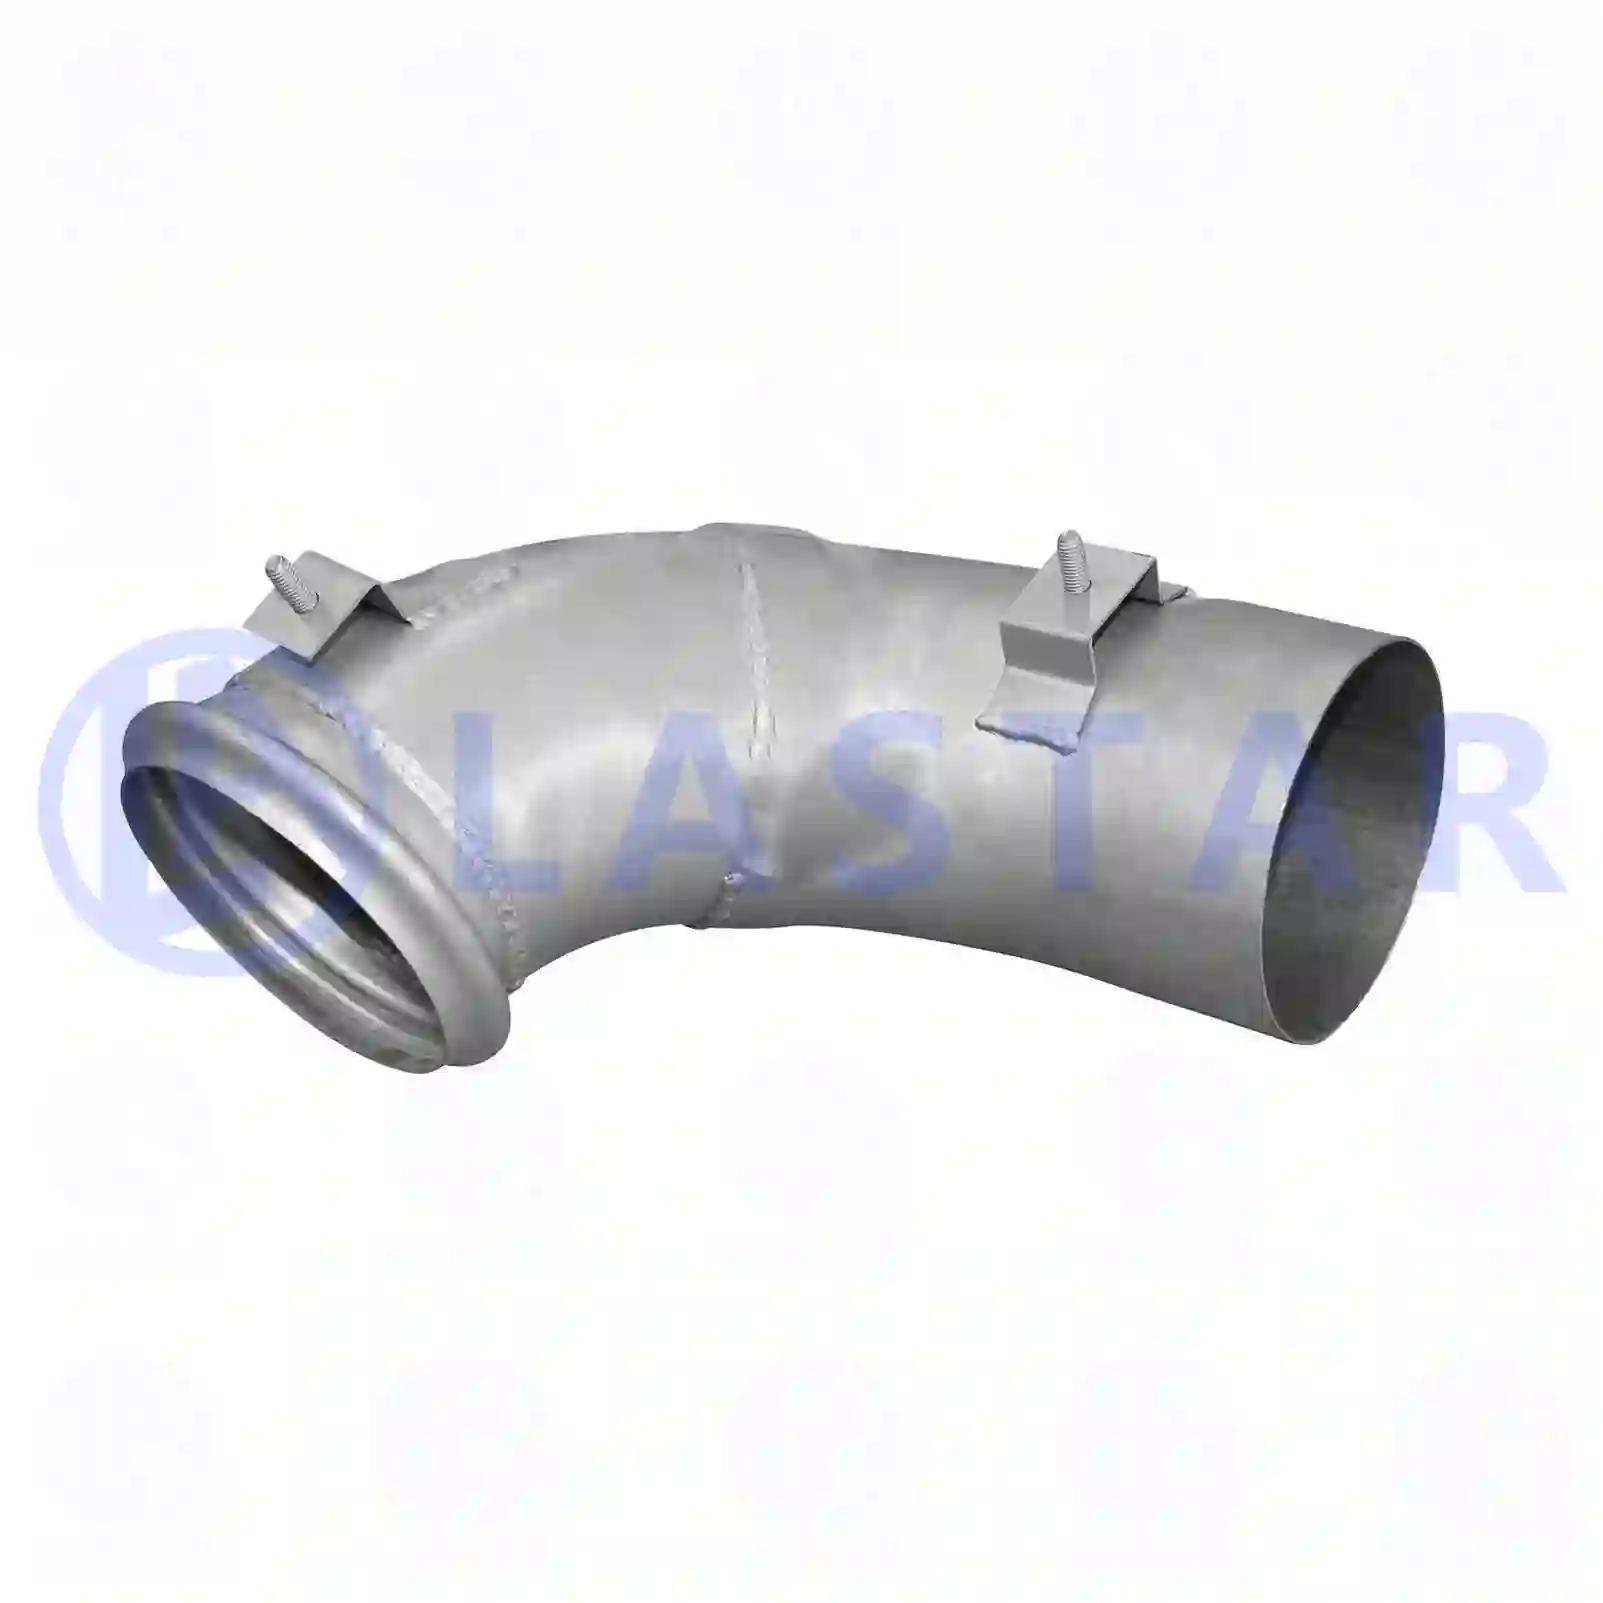 Exhaust pipe, 77706894, 7420854456, 20854 ||  77706894 Lastar Spare Part | Truck Spare Parts, Auotomotive Spare Parts Exhaust pipe, 77706894, 7420854456, 20854 ||  77706894 Lastar Spare Part | Truck Spare Parts, Auotomotive Spare Parts